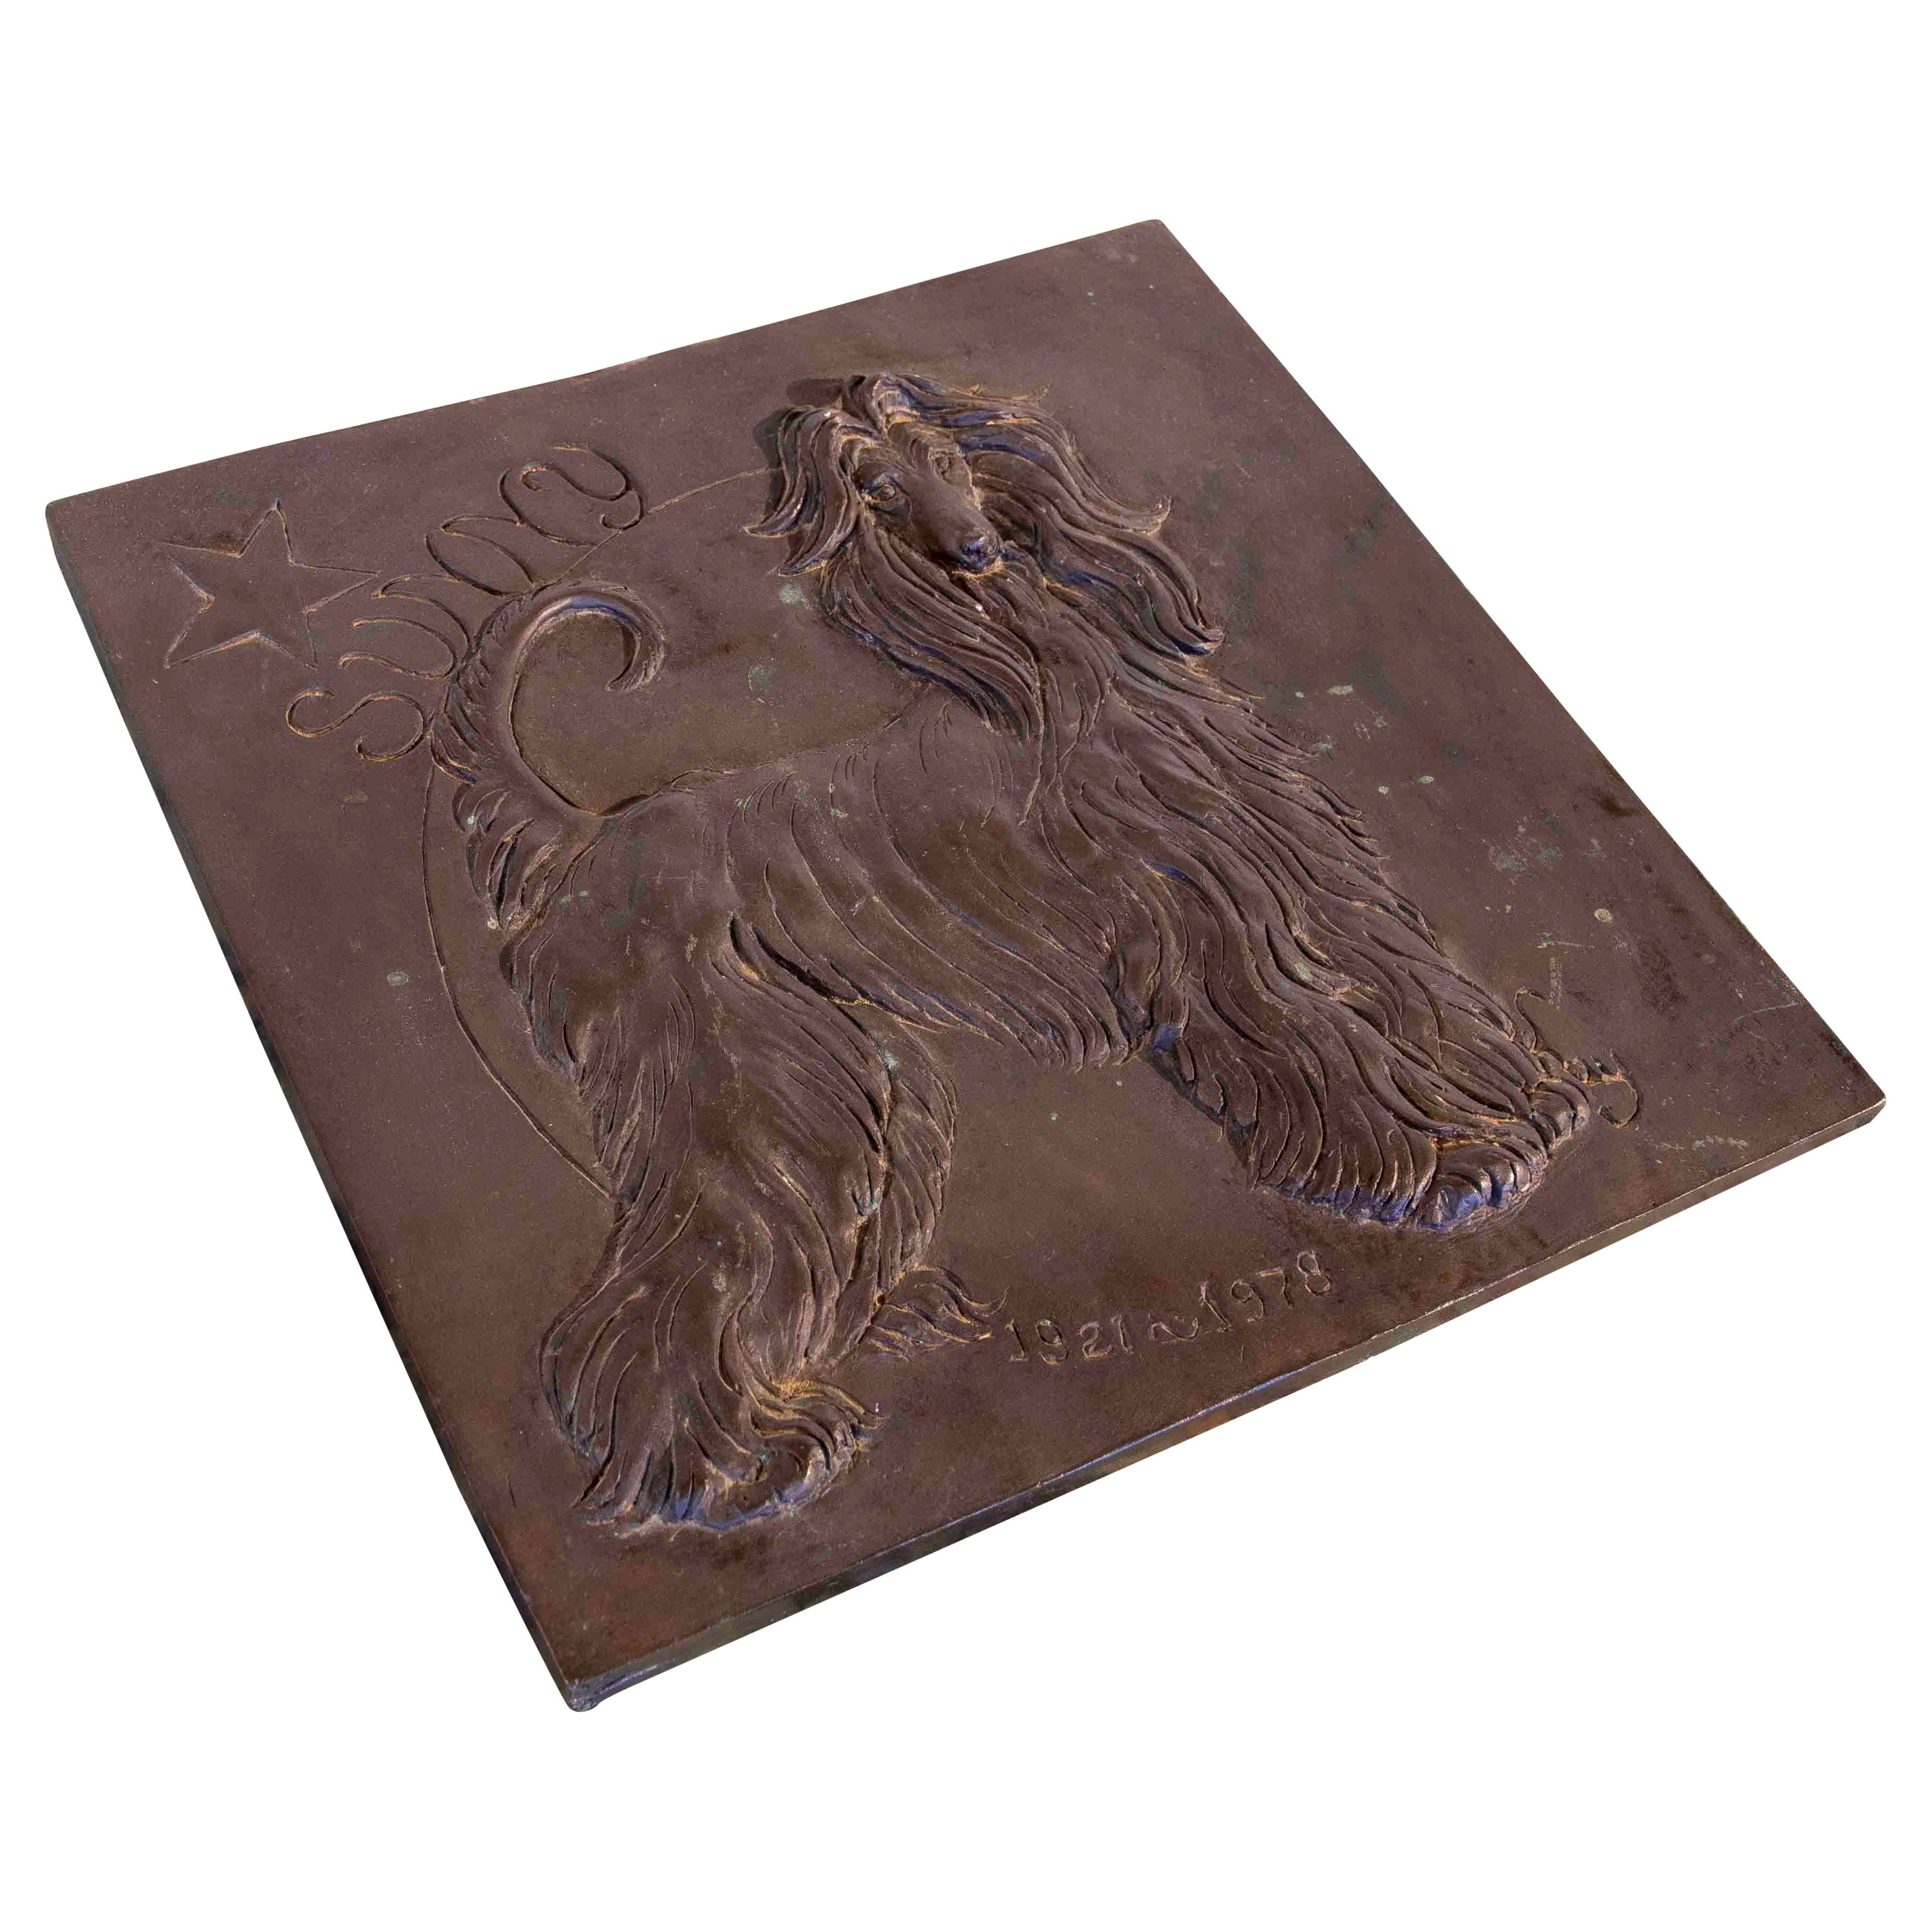 Signed Bronze Commemorative Plaque with Image of Dog and "Sunny" Written on It For Sale